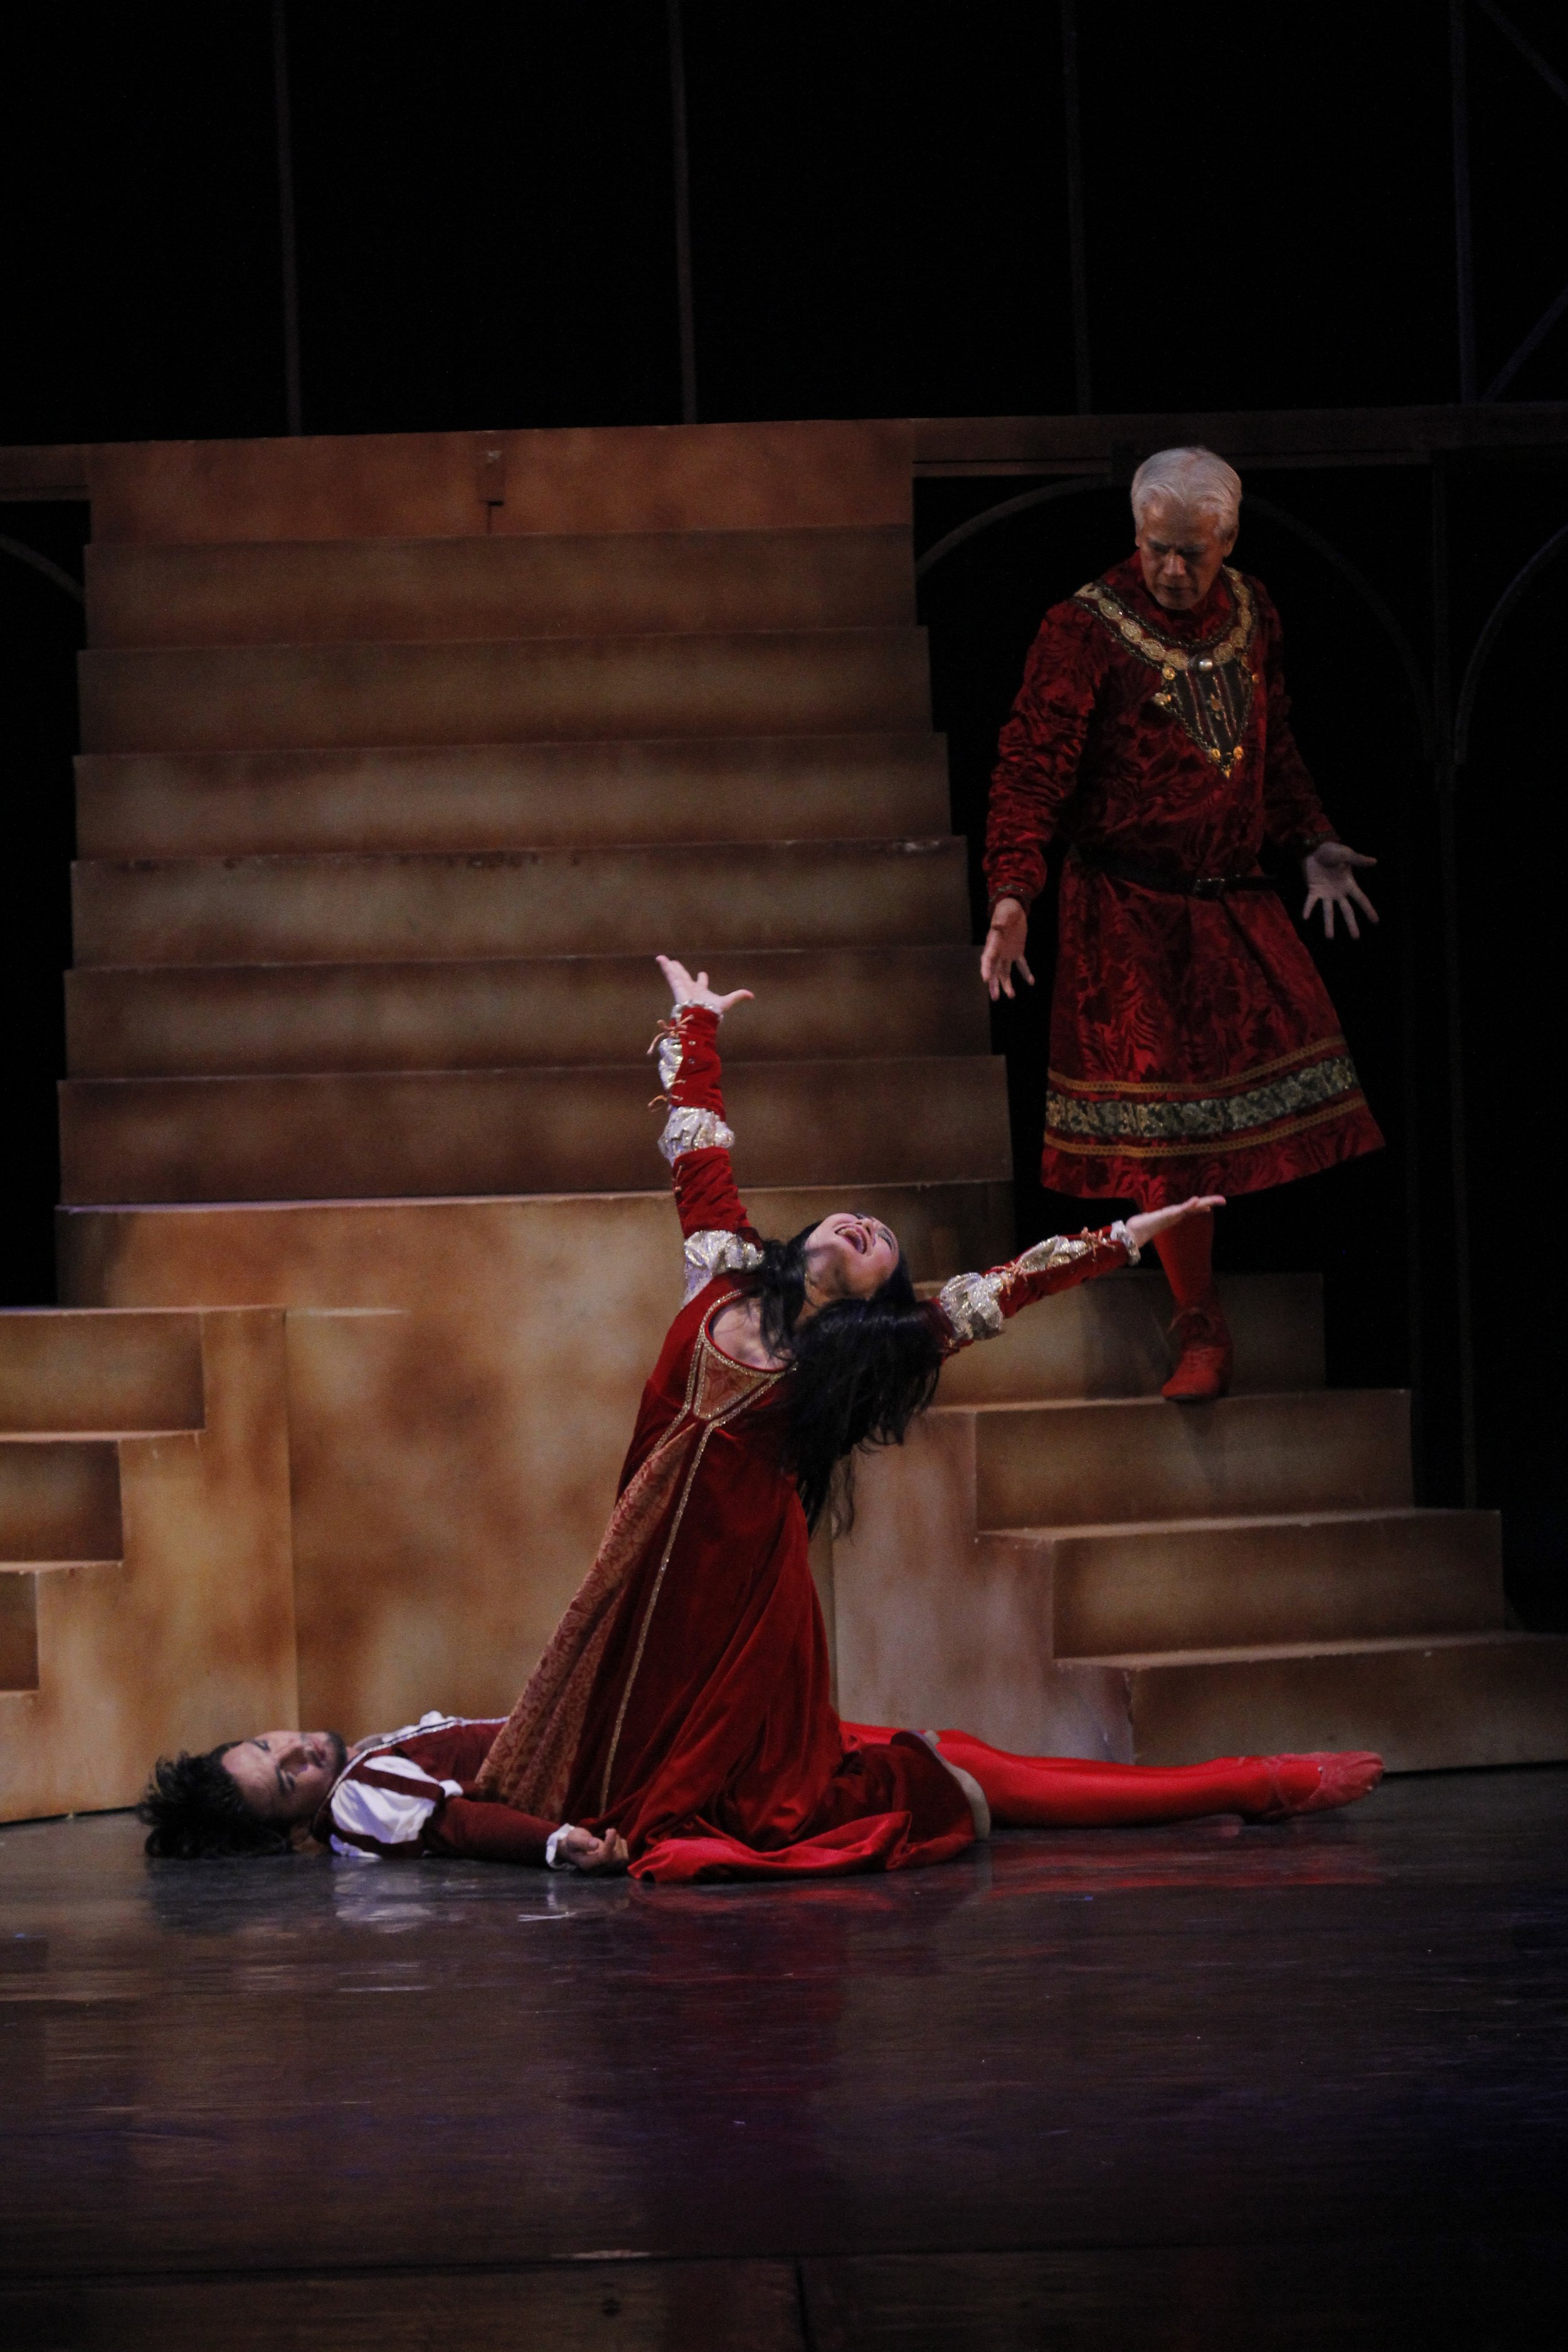    An agonized Lady Capulet (Lisa Macuja-Elizalde) grieves over the lifeless body of Tybalt (Arnulfo Andrade) as Lord Capulet (Nonoy Froilan) looks on in a scene from Paul Vasterling’s  Romeo and Juliet  (2015). Tybalt, Juliet’s cousin, has been slai